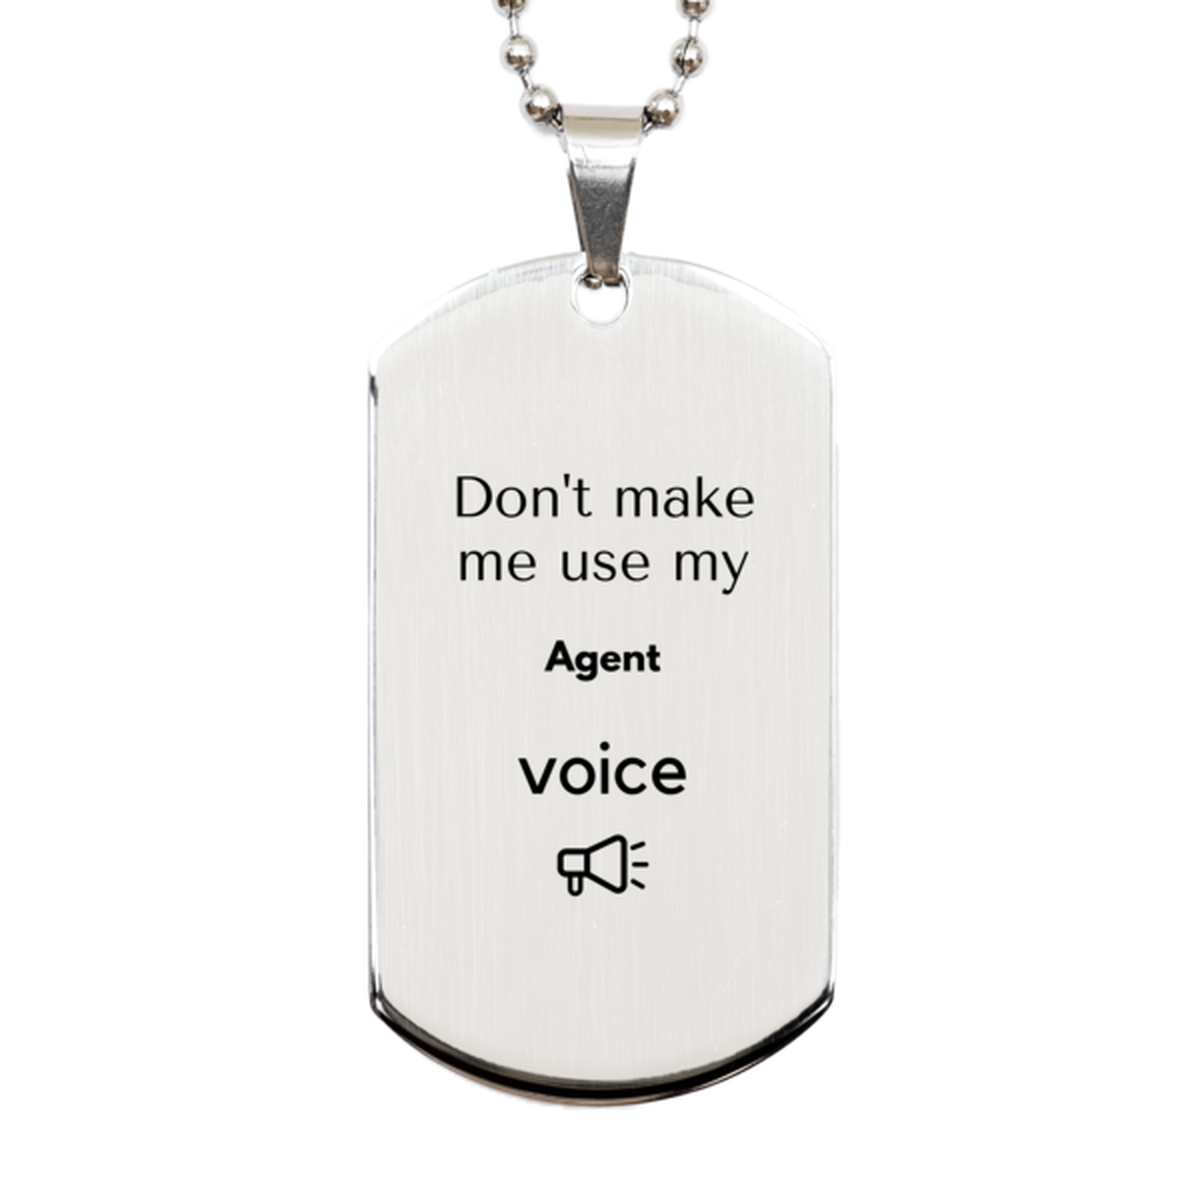 Don't make me use my Agent voice, Sarcasm Agent Gifts, Christmas Agent Silver Dog Tag Birthday Unique Gifts For Agent Coworkers, Men, Women, Colleague, Friends